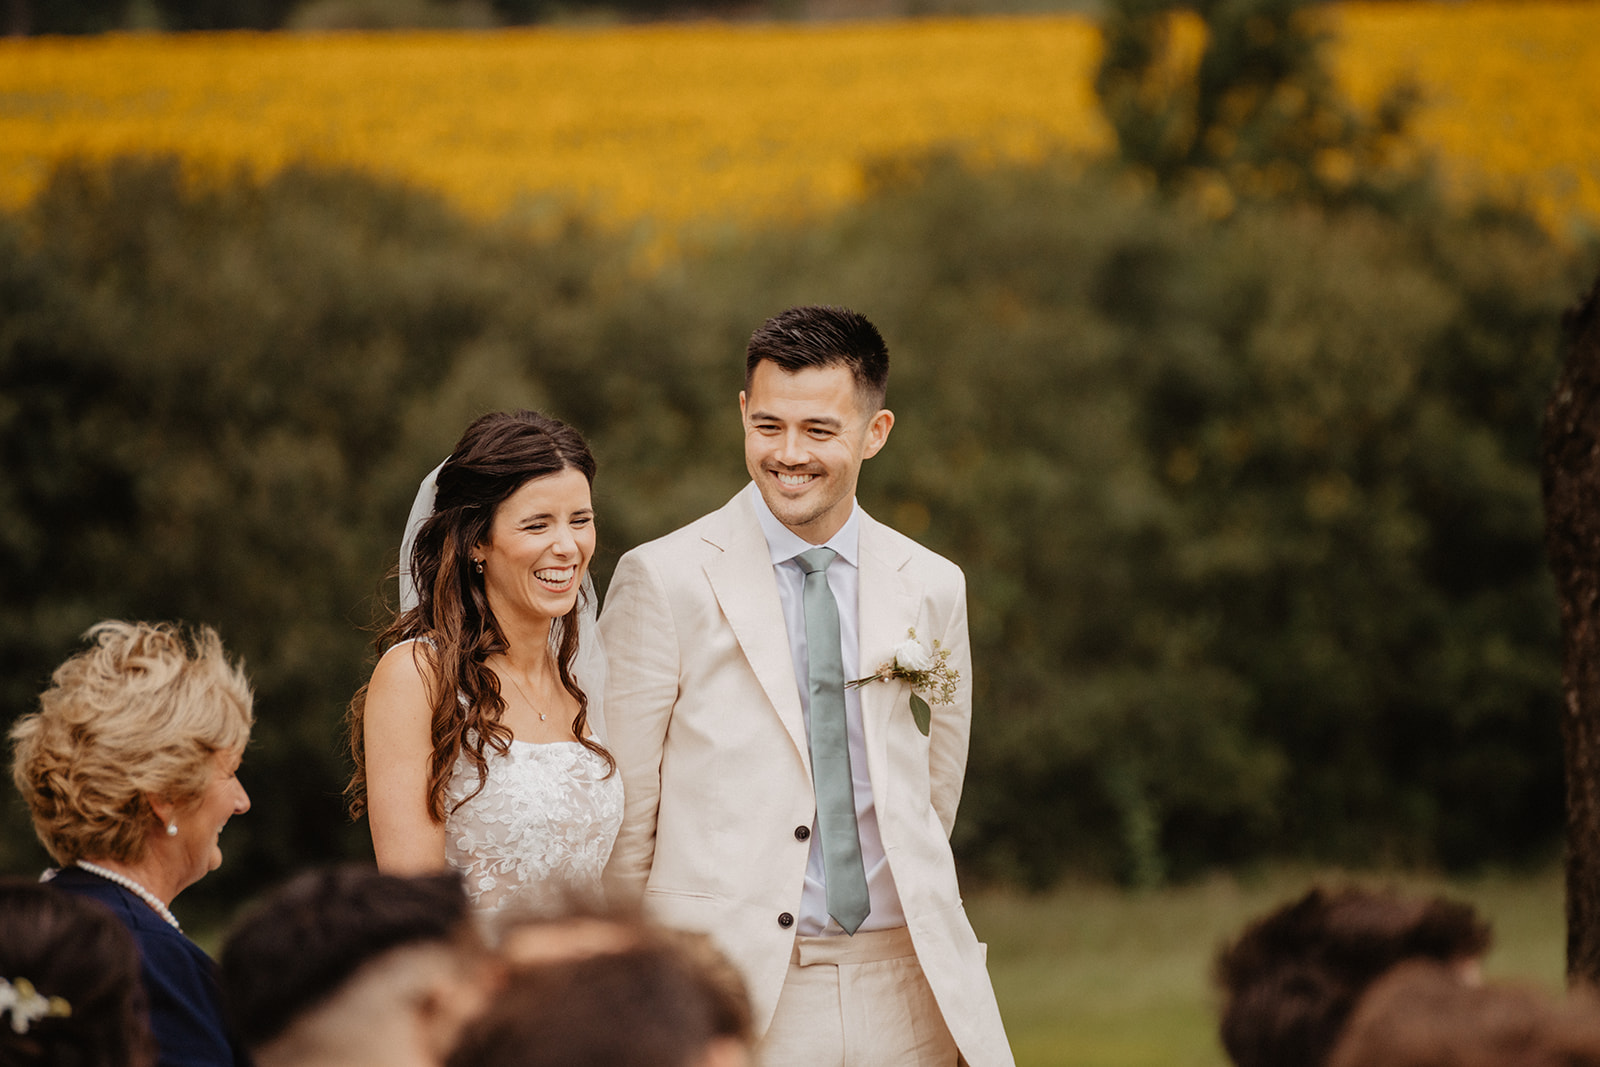 An english couple who gets married in france at their ceremony in front of a sunflower field 